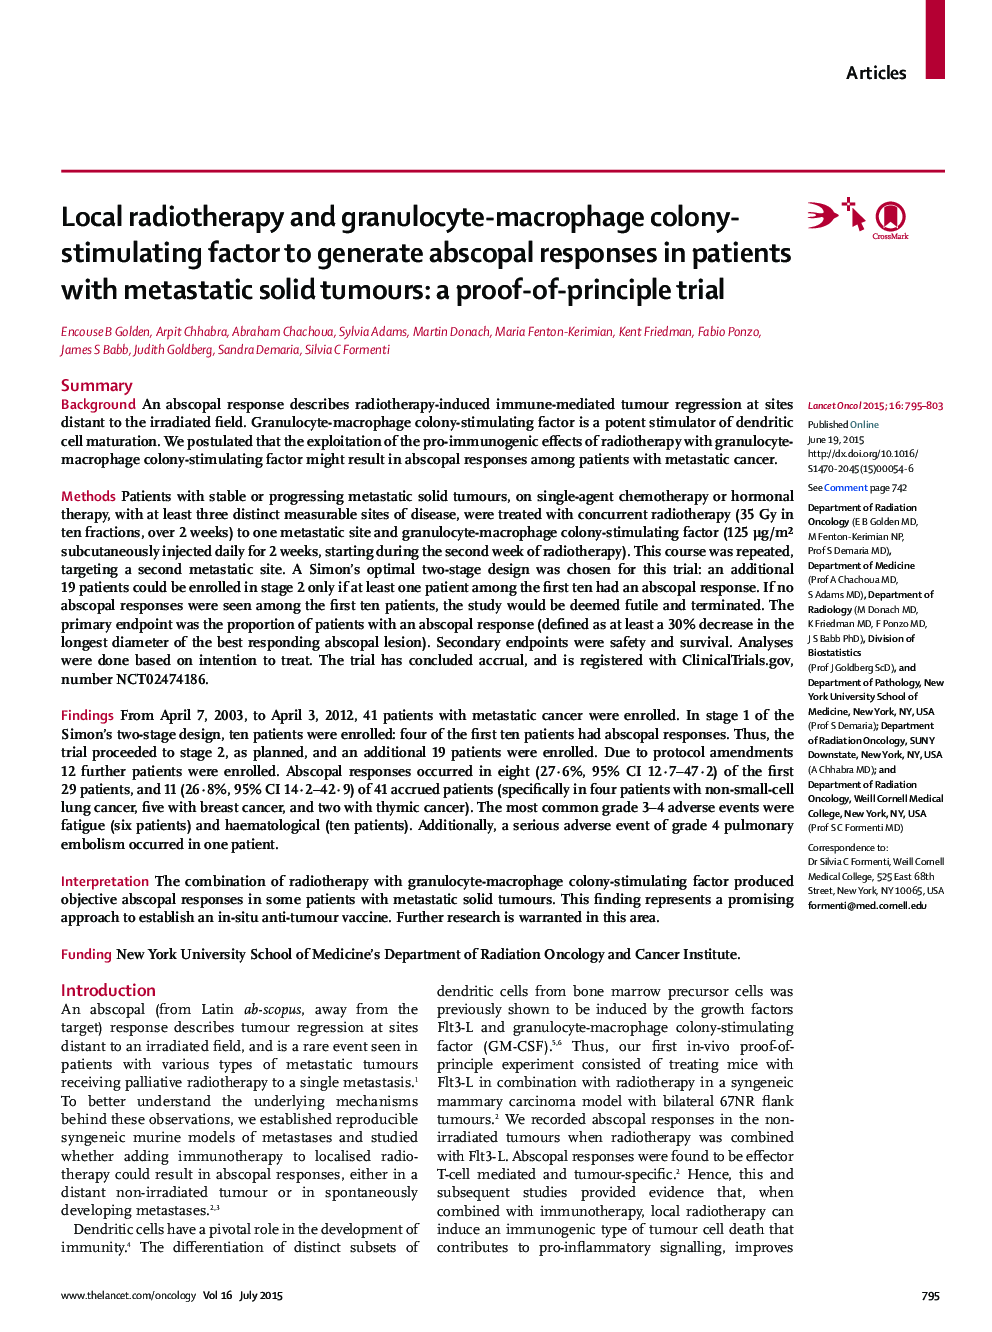 Local radiotherapy and granulocyte-macrophage colony-stimulating factor to generate abscopal responses in patients with metastatic solid tumours: a proof-of-principle trial